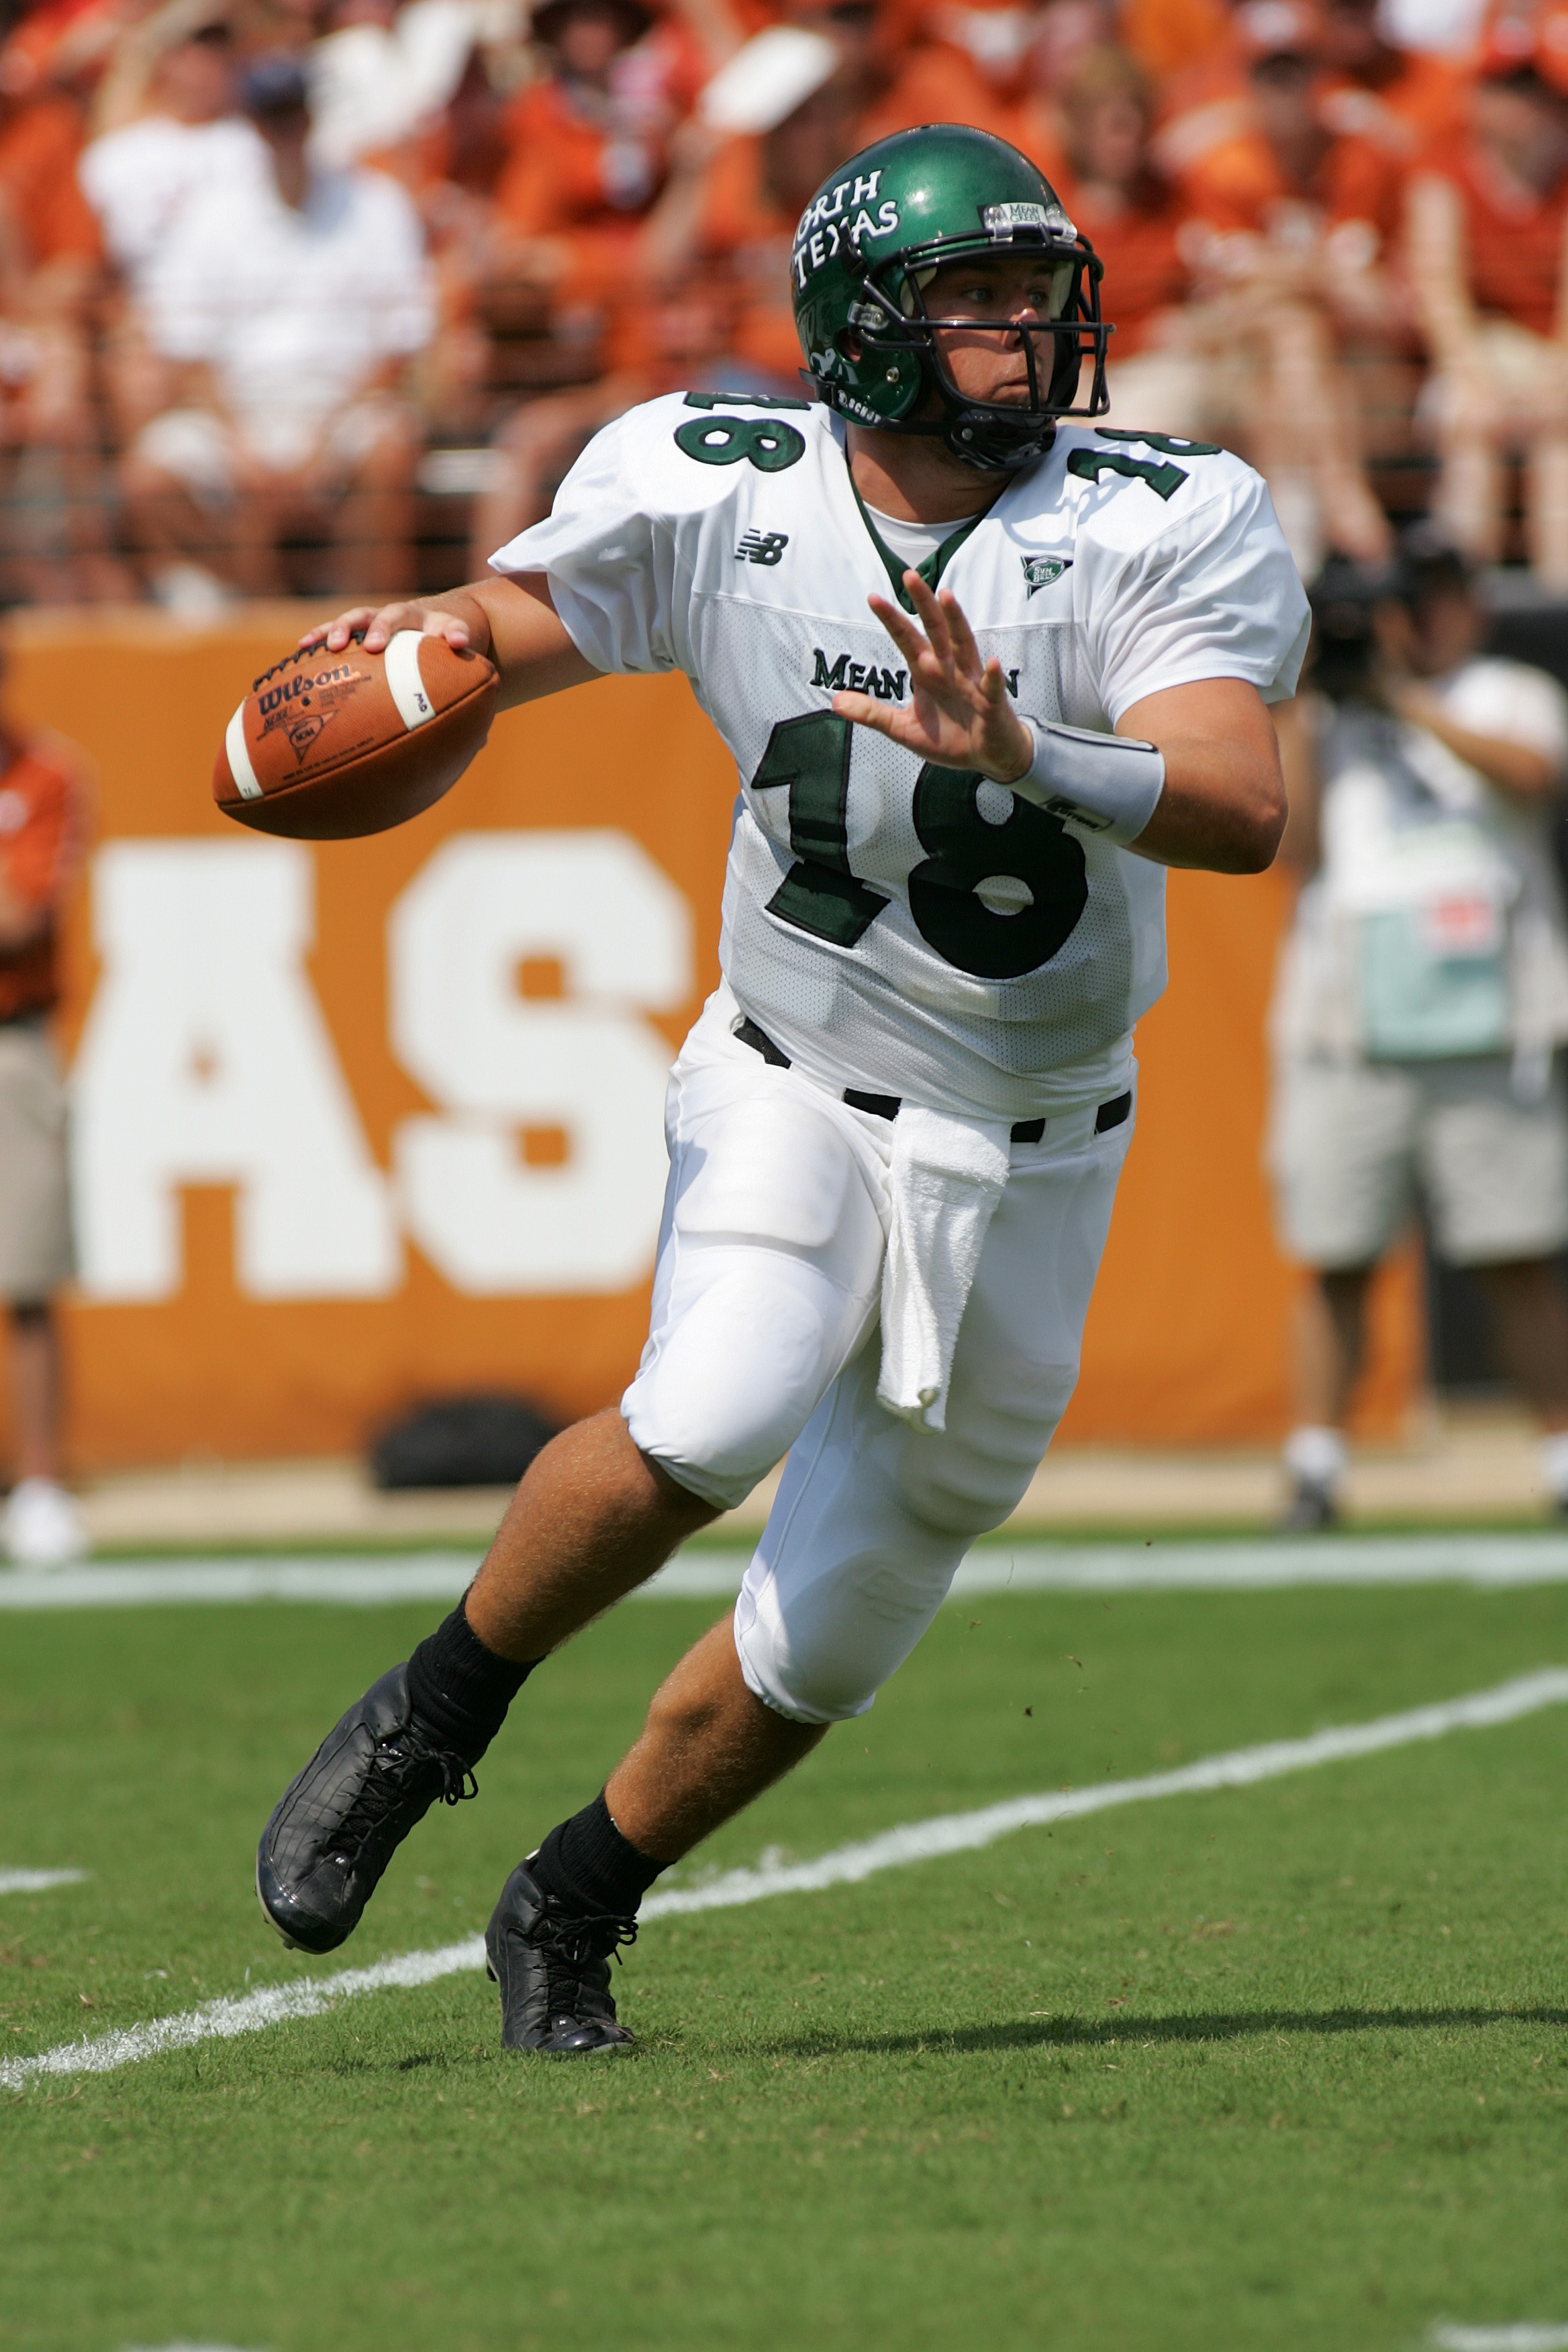 AUSTIN, TX - SEPTEMBER 2:  Quarterback Matt Phillips #18 of the North Texas Eagles looks to pass against the Texas Longhorns on September 2, 2006 at Texas Memorial Stadium in Austin, Texas. The Longhorns defeated the Eagles 56-7. (Photo by Ronald Martinez